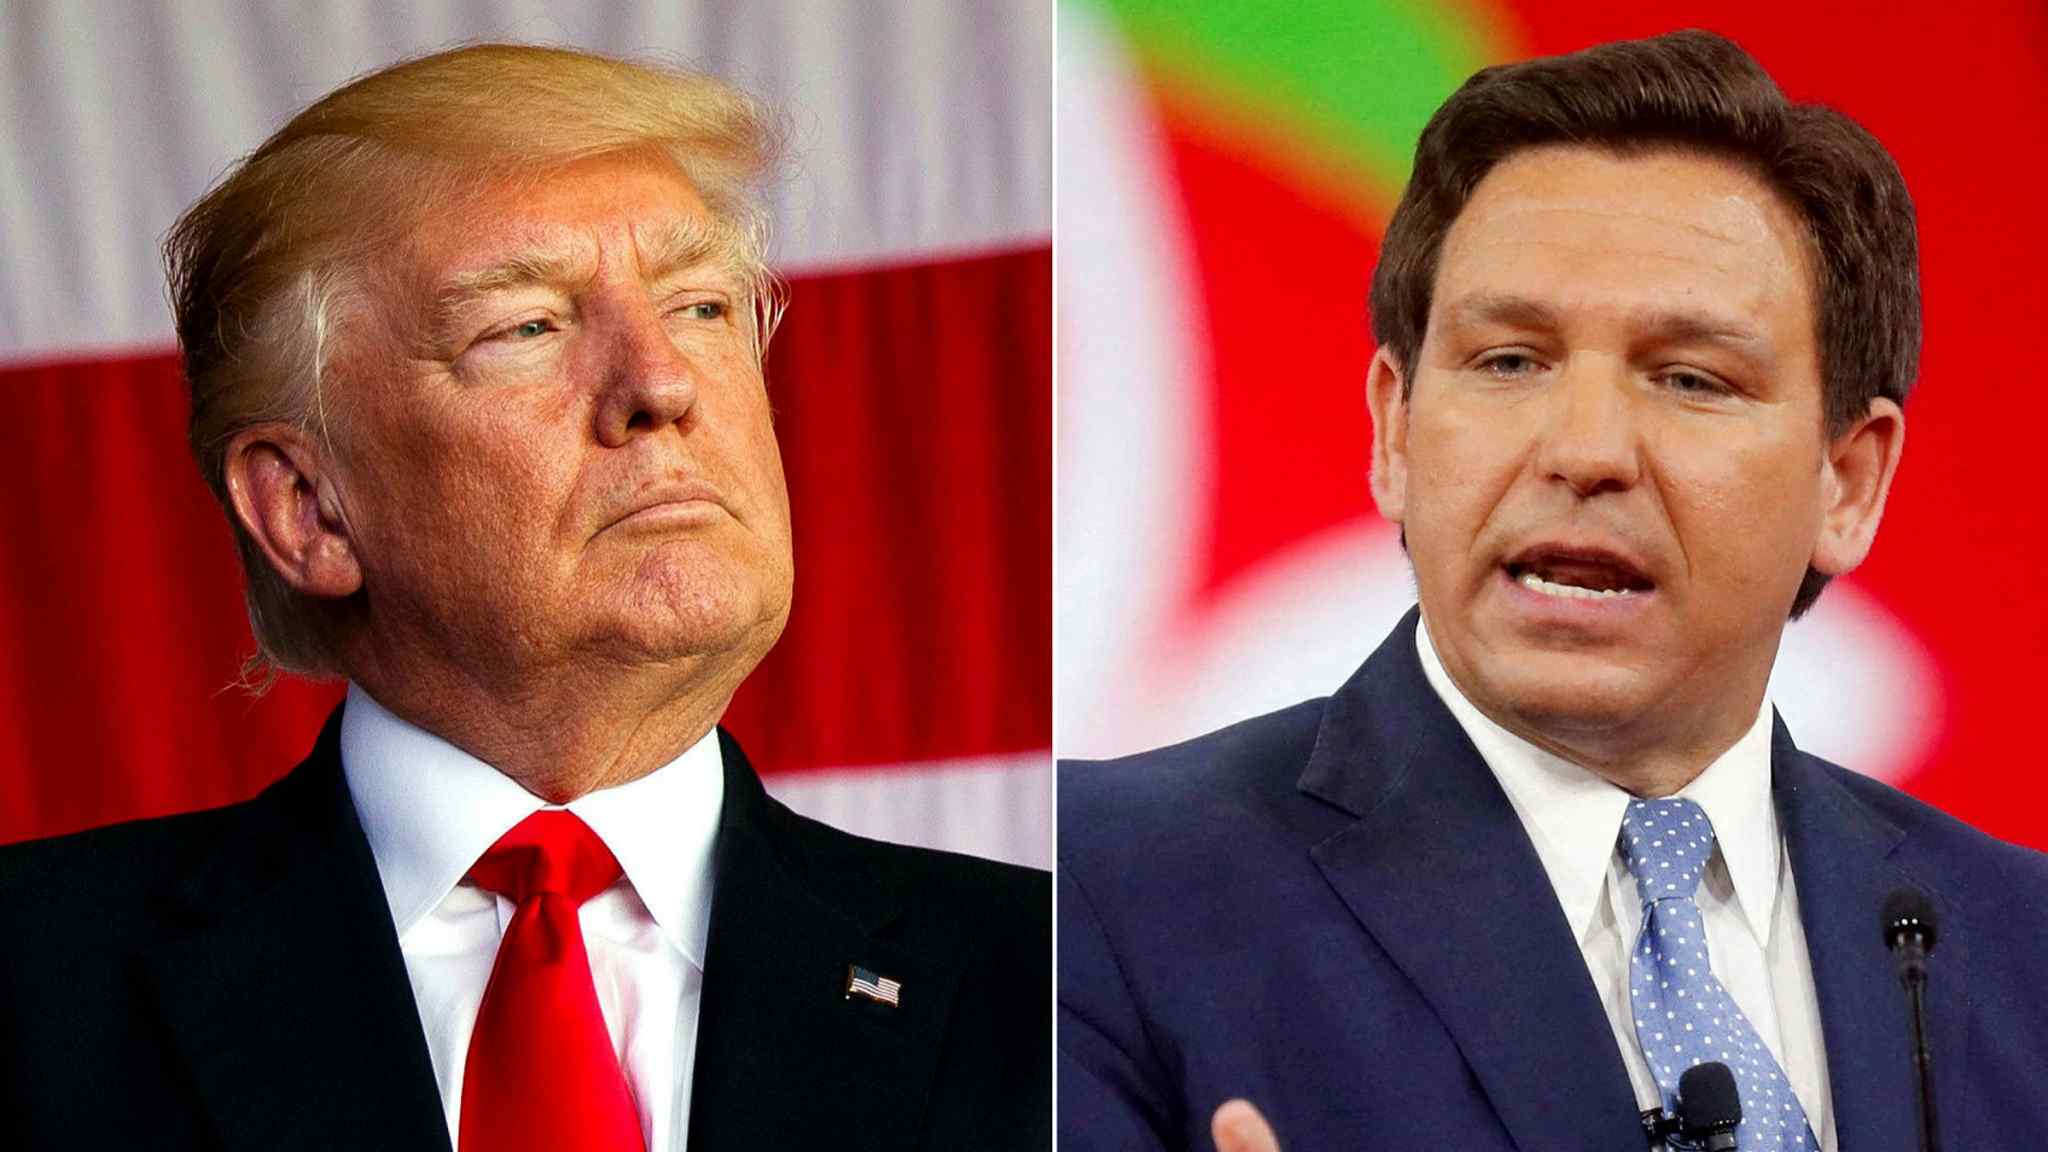 DeSantis benefits from ‘Trump fatigue’ ahead of possible 2024 face-off